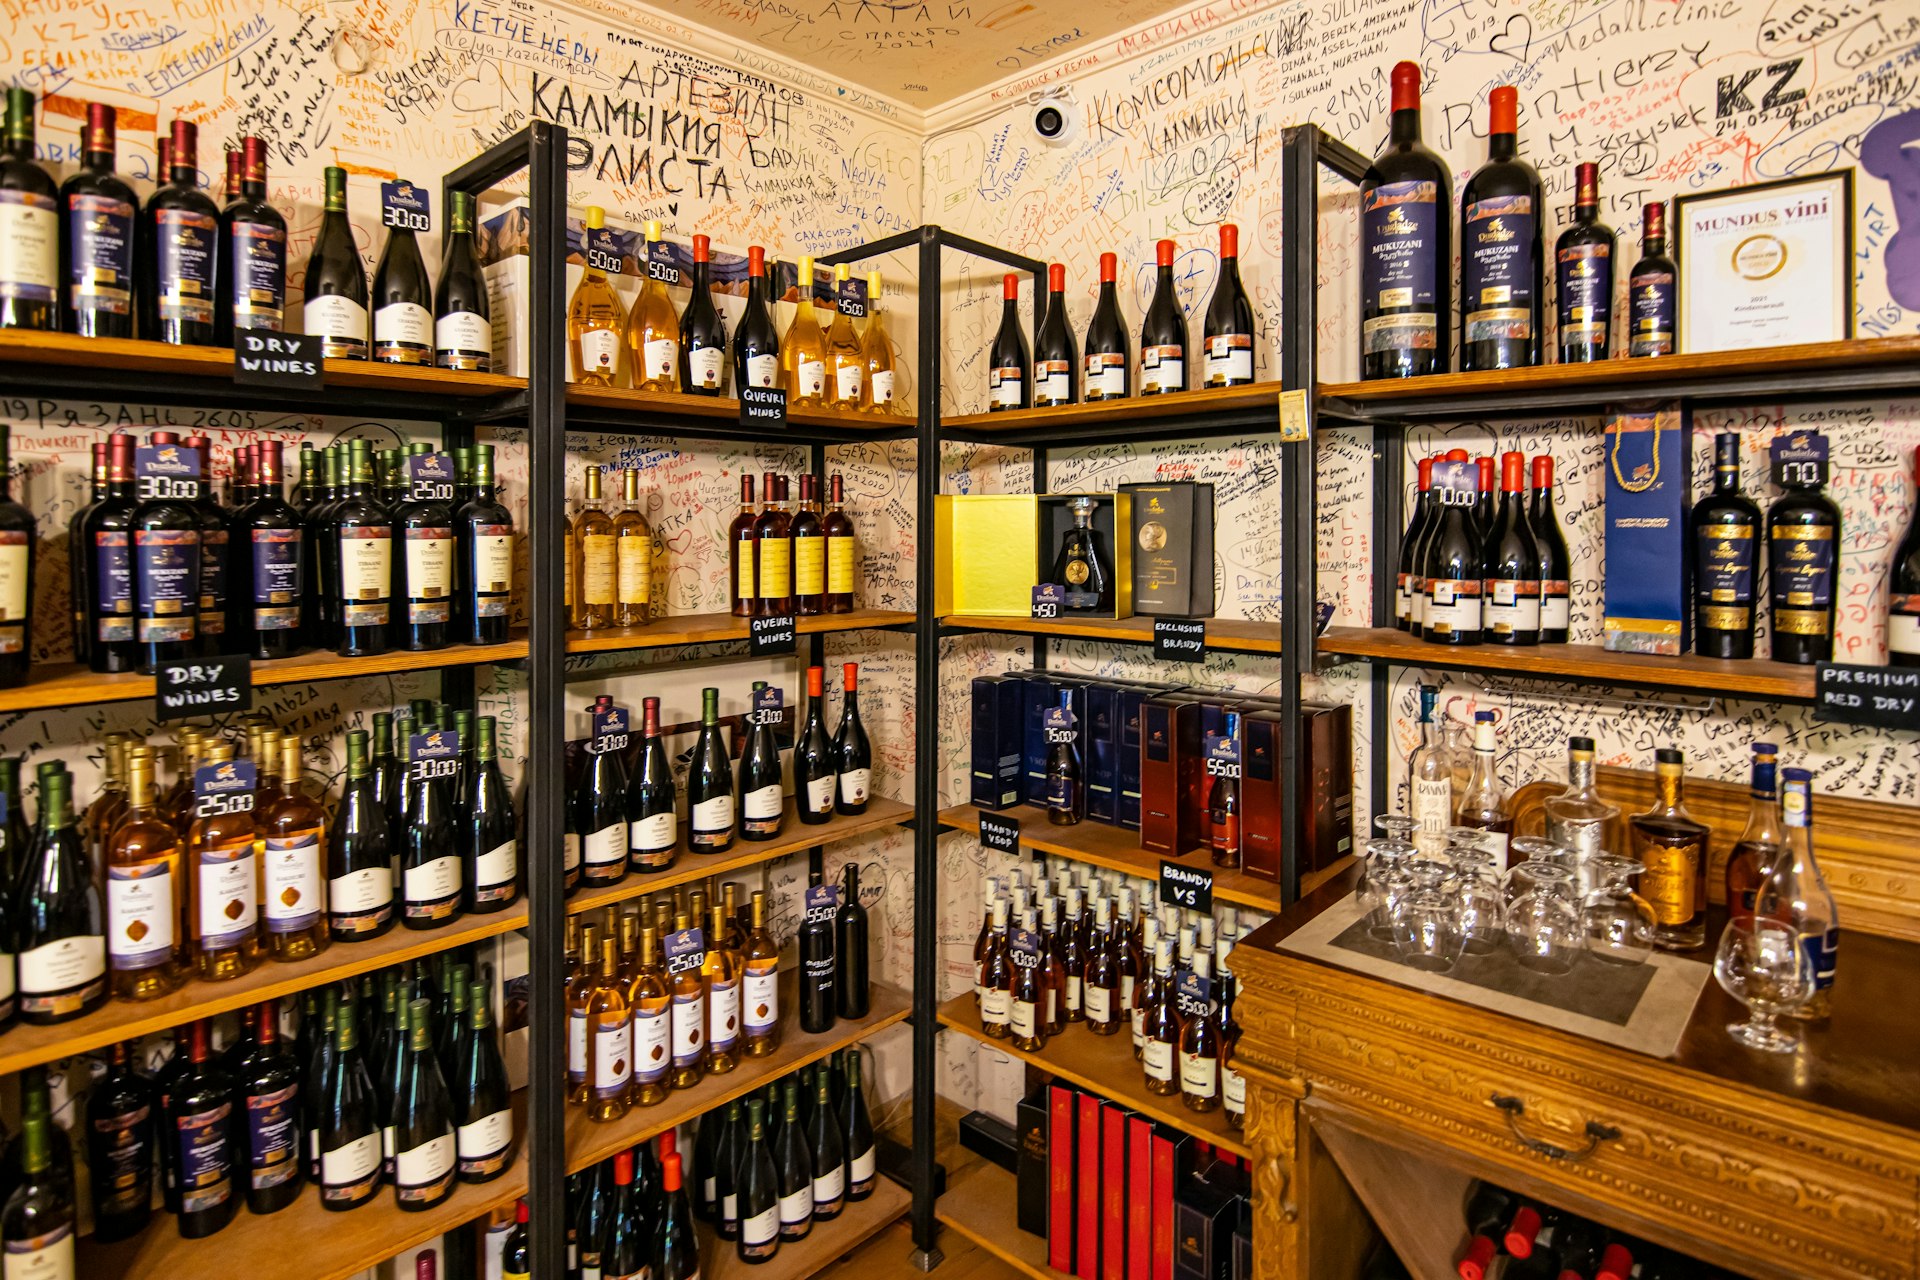 A wine shop has shelves filled with different varieties of Georgian wine; the walls behind the shelves are covered in graffiti-style writing.